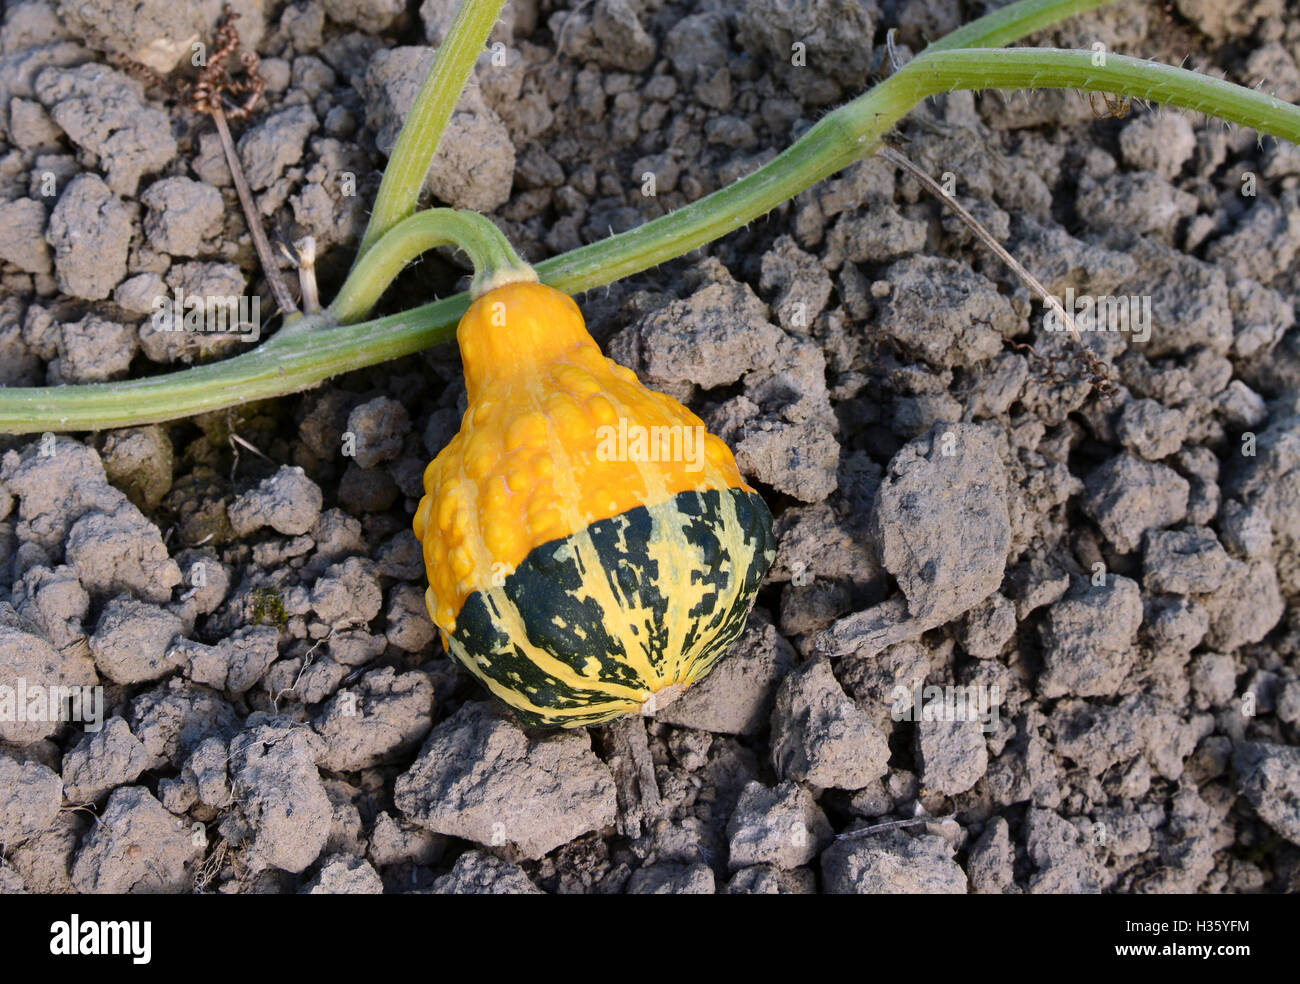 Yellow and green bumpy ornamental gourd growing on a long vine Stock Photo